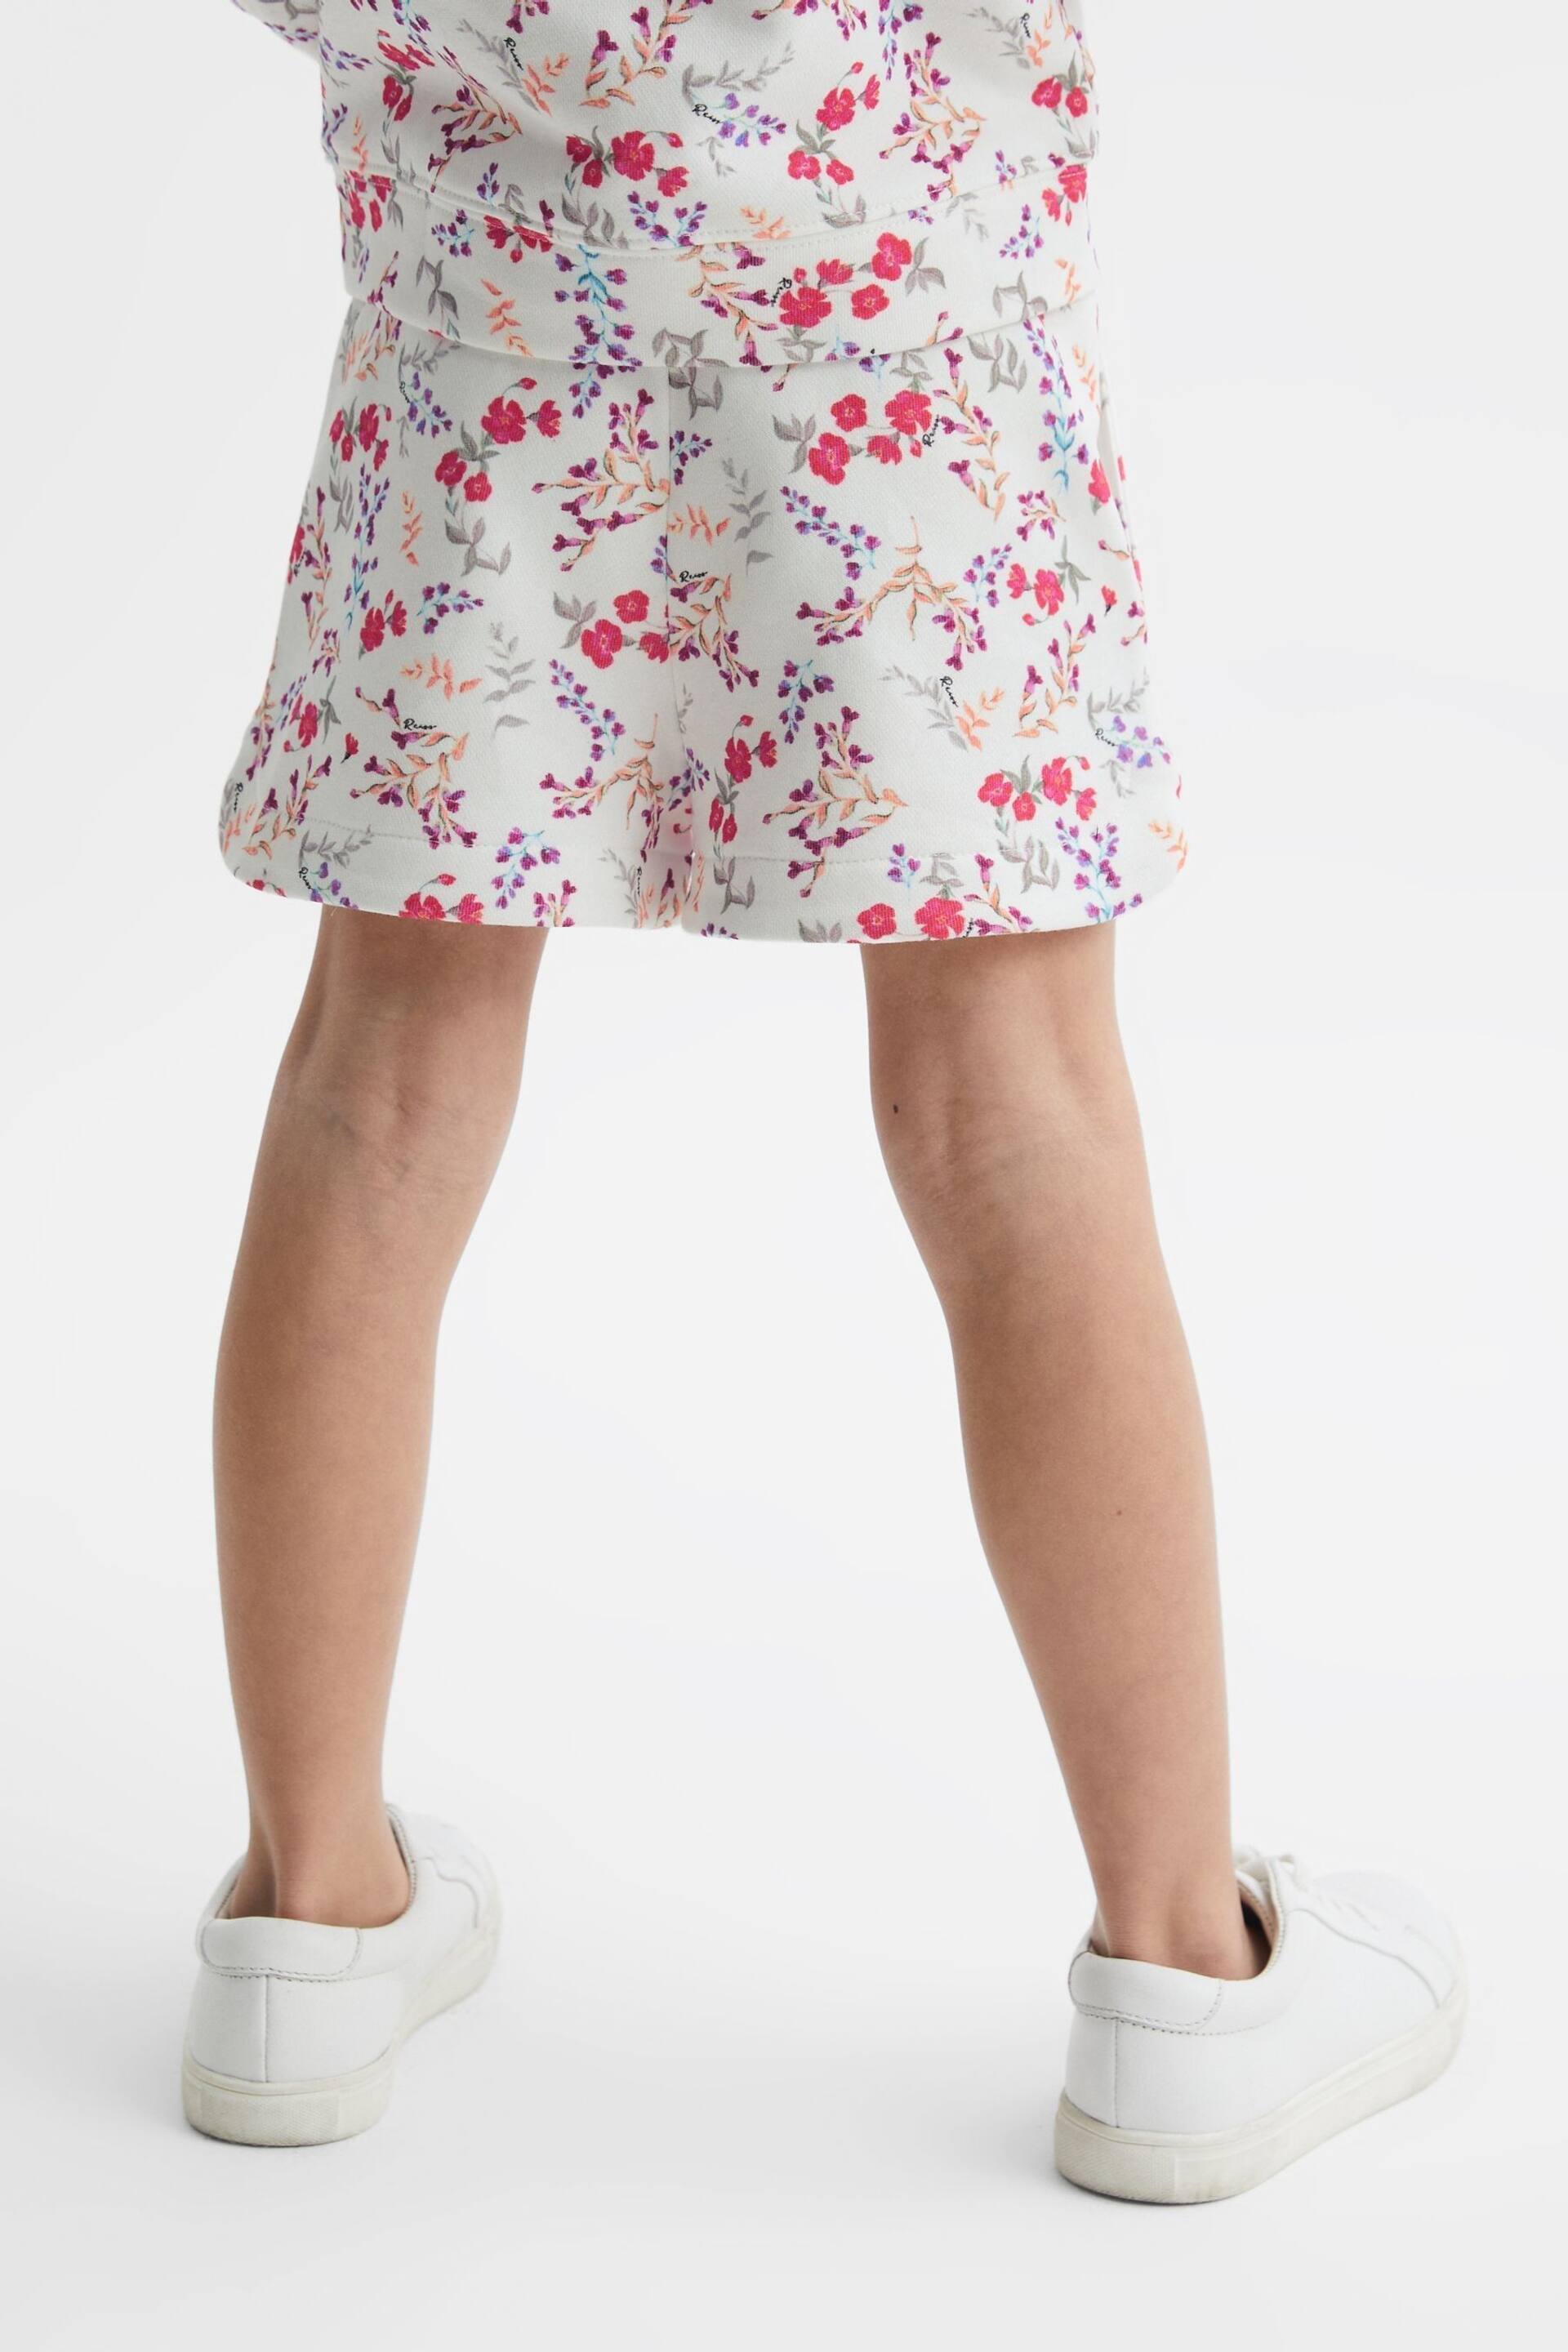 Reiss Pink Print Harper Senior Relaxed Floral Printed Shorts - Image 5 of 6